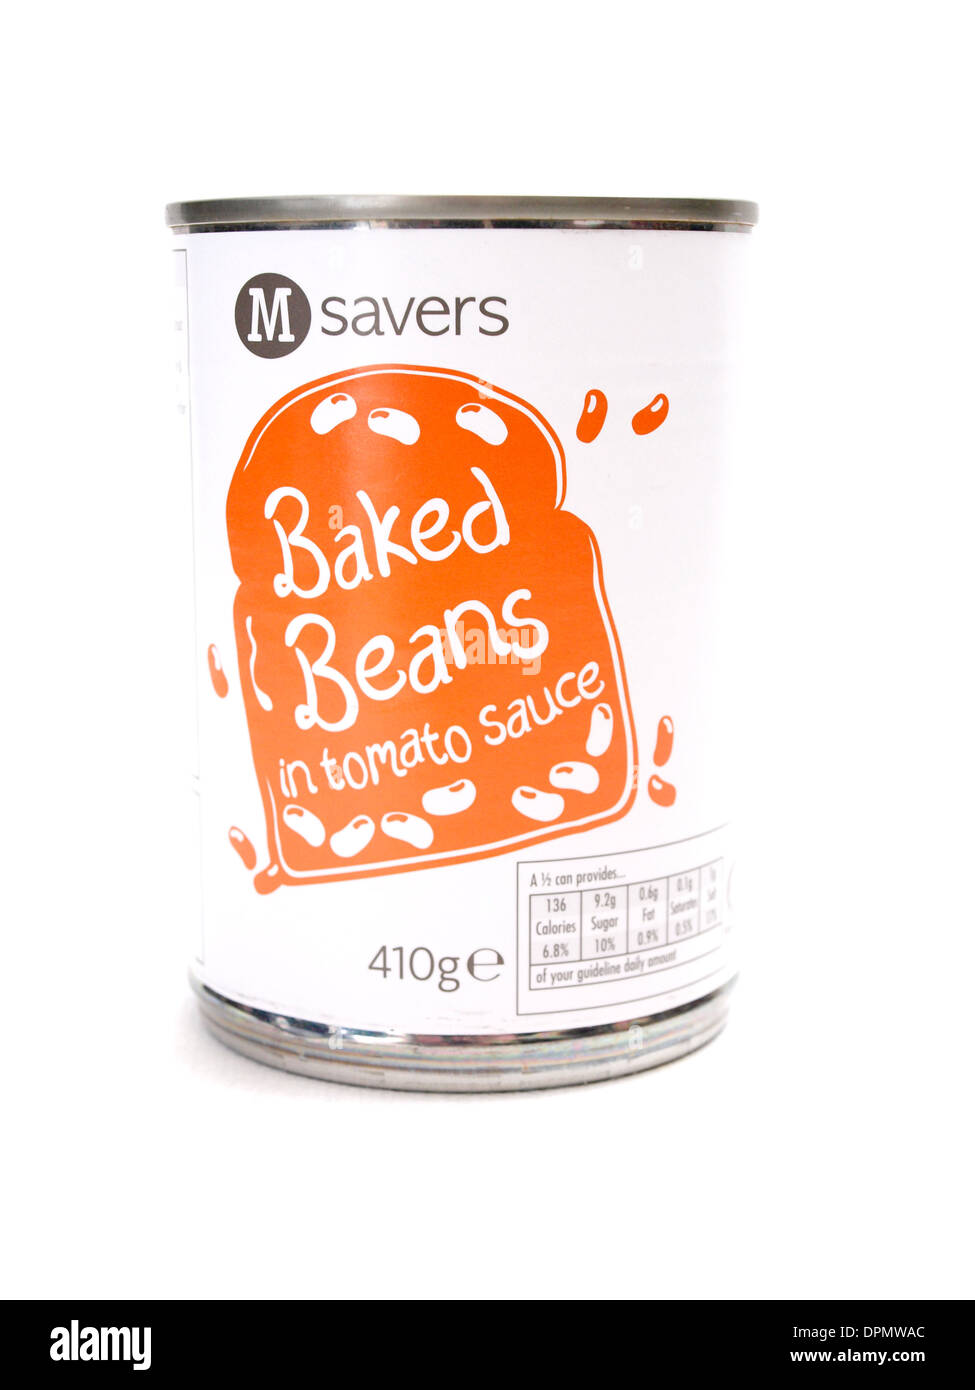 Tin of Morrisons own brand cheap baked beans on a white background Stock Photo